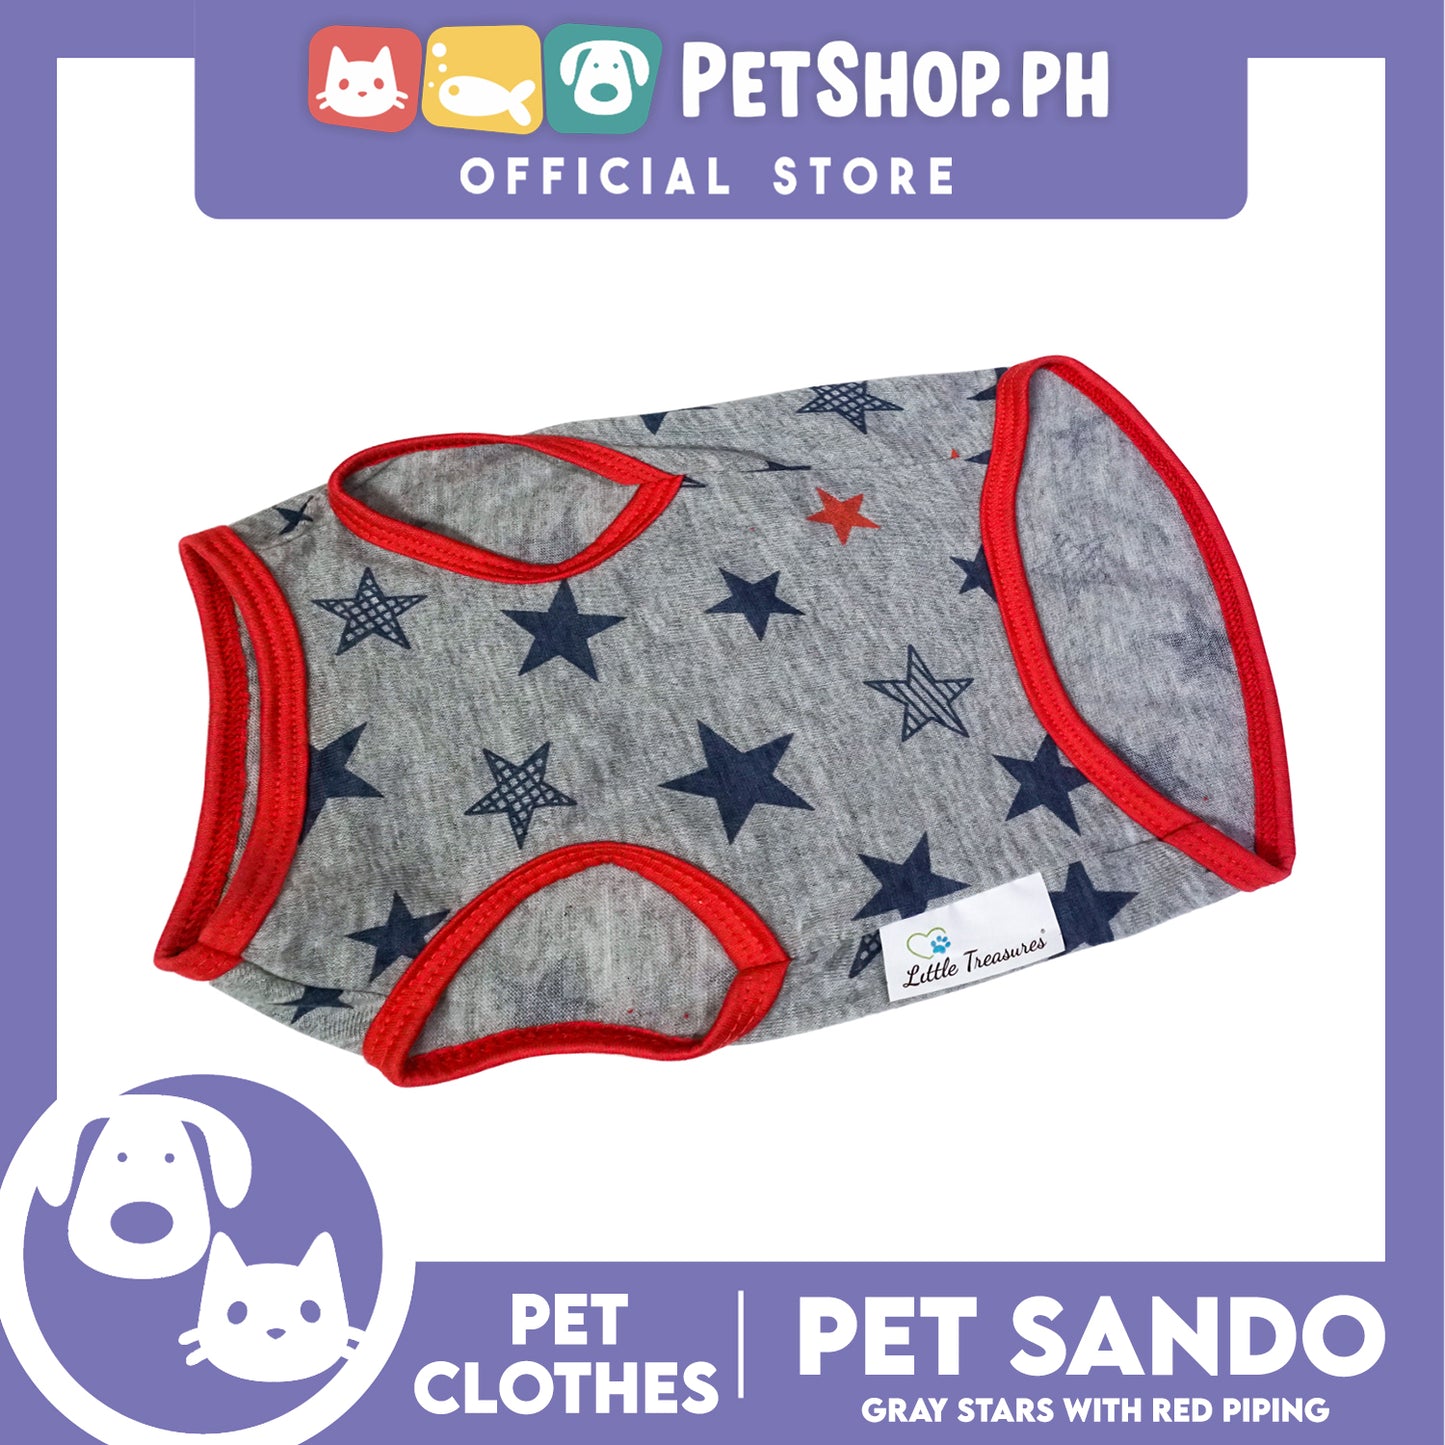 Pet Sando Gray Stars with Red Piping (Large) Pet Shirt Clothes Perfect fit for Dogs